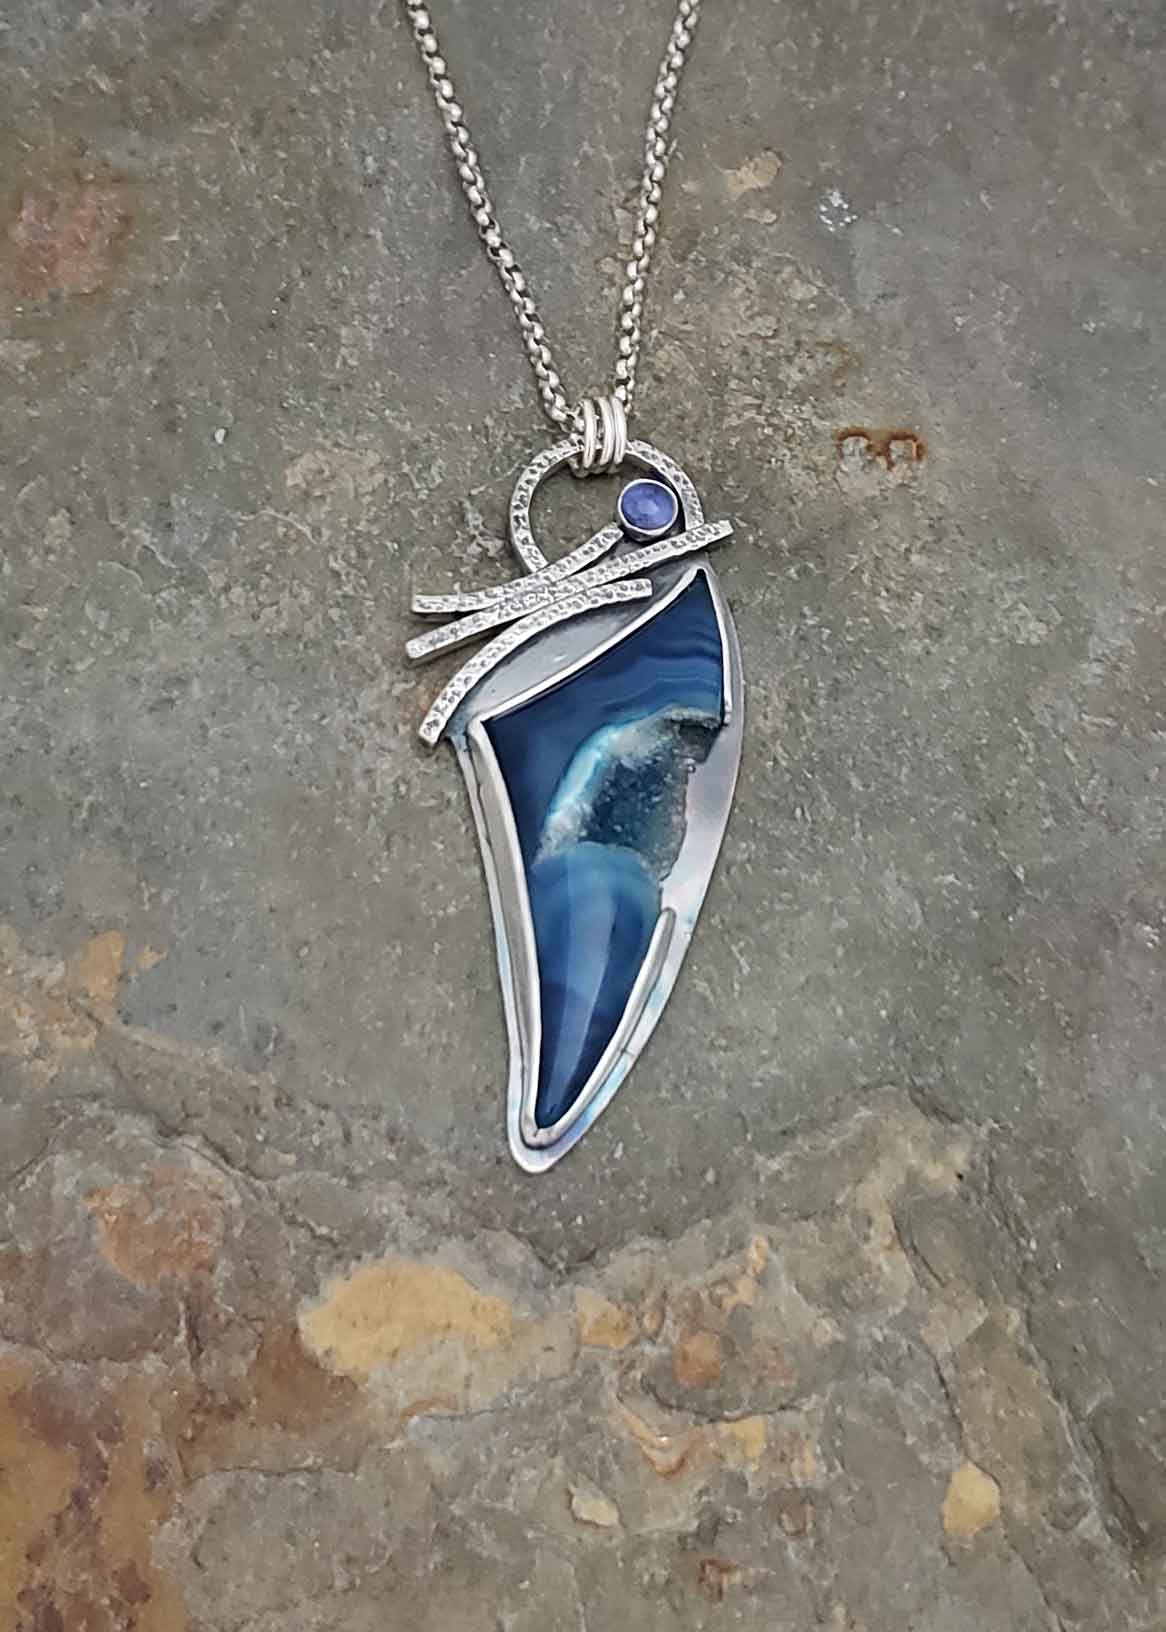 Second Chances - blue druzy agate and ioliate..